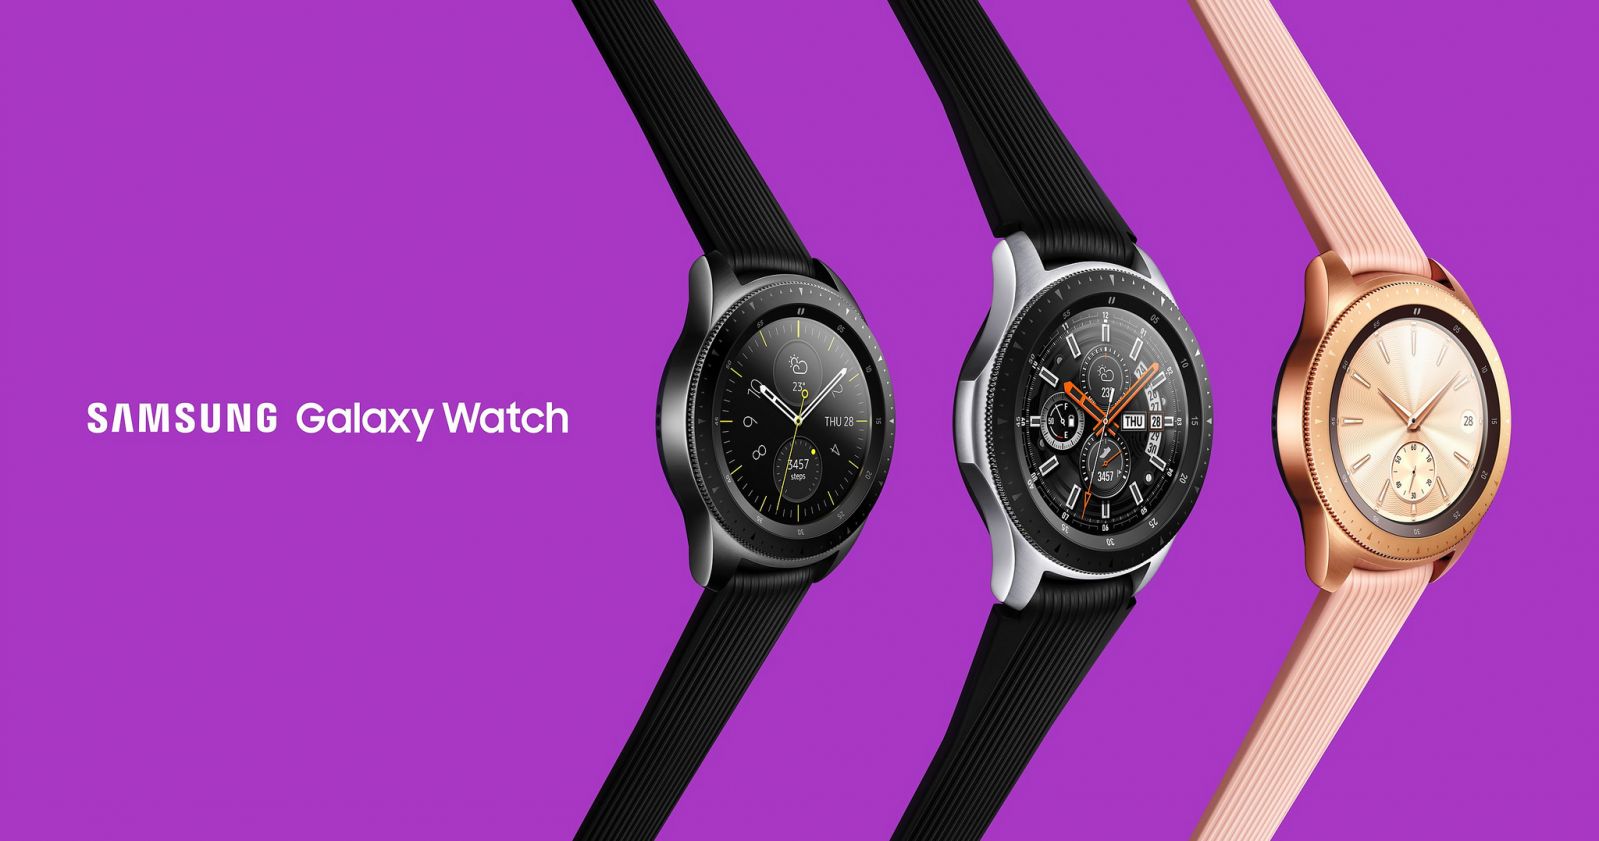 The-Samsung-Galaxy-Watch-in-pictures.jpg